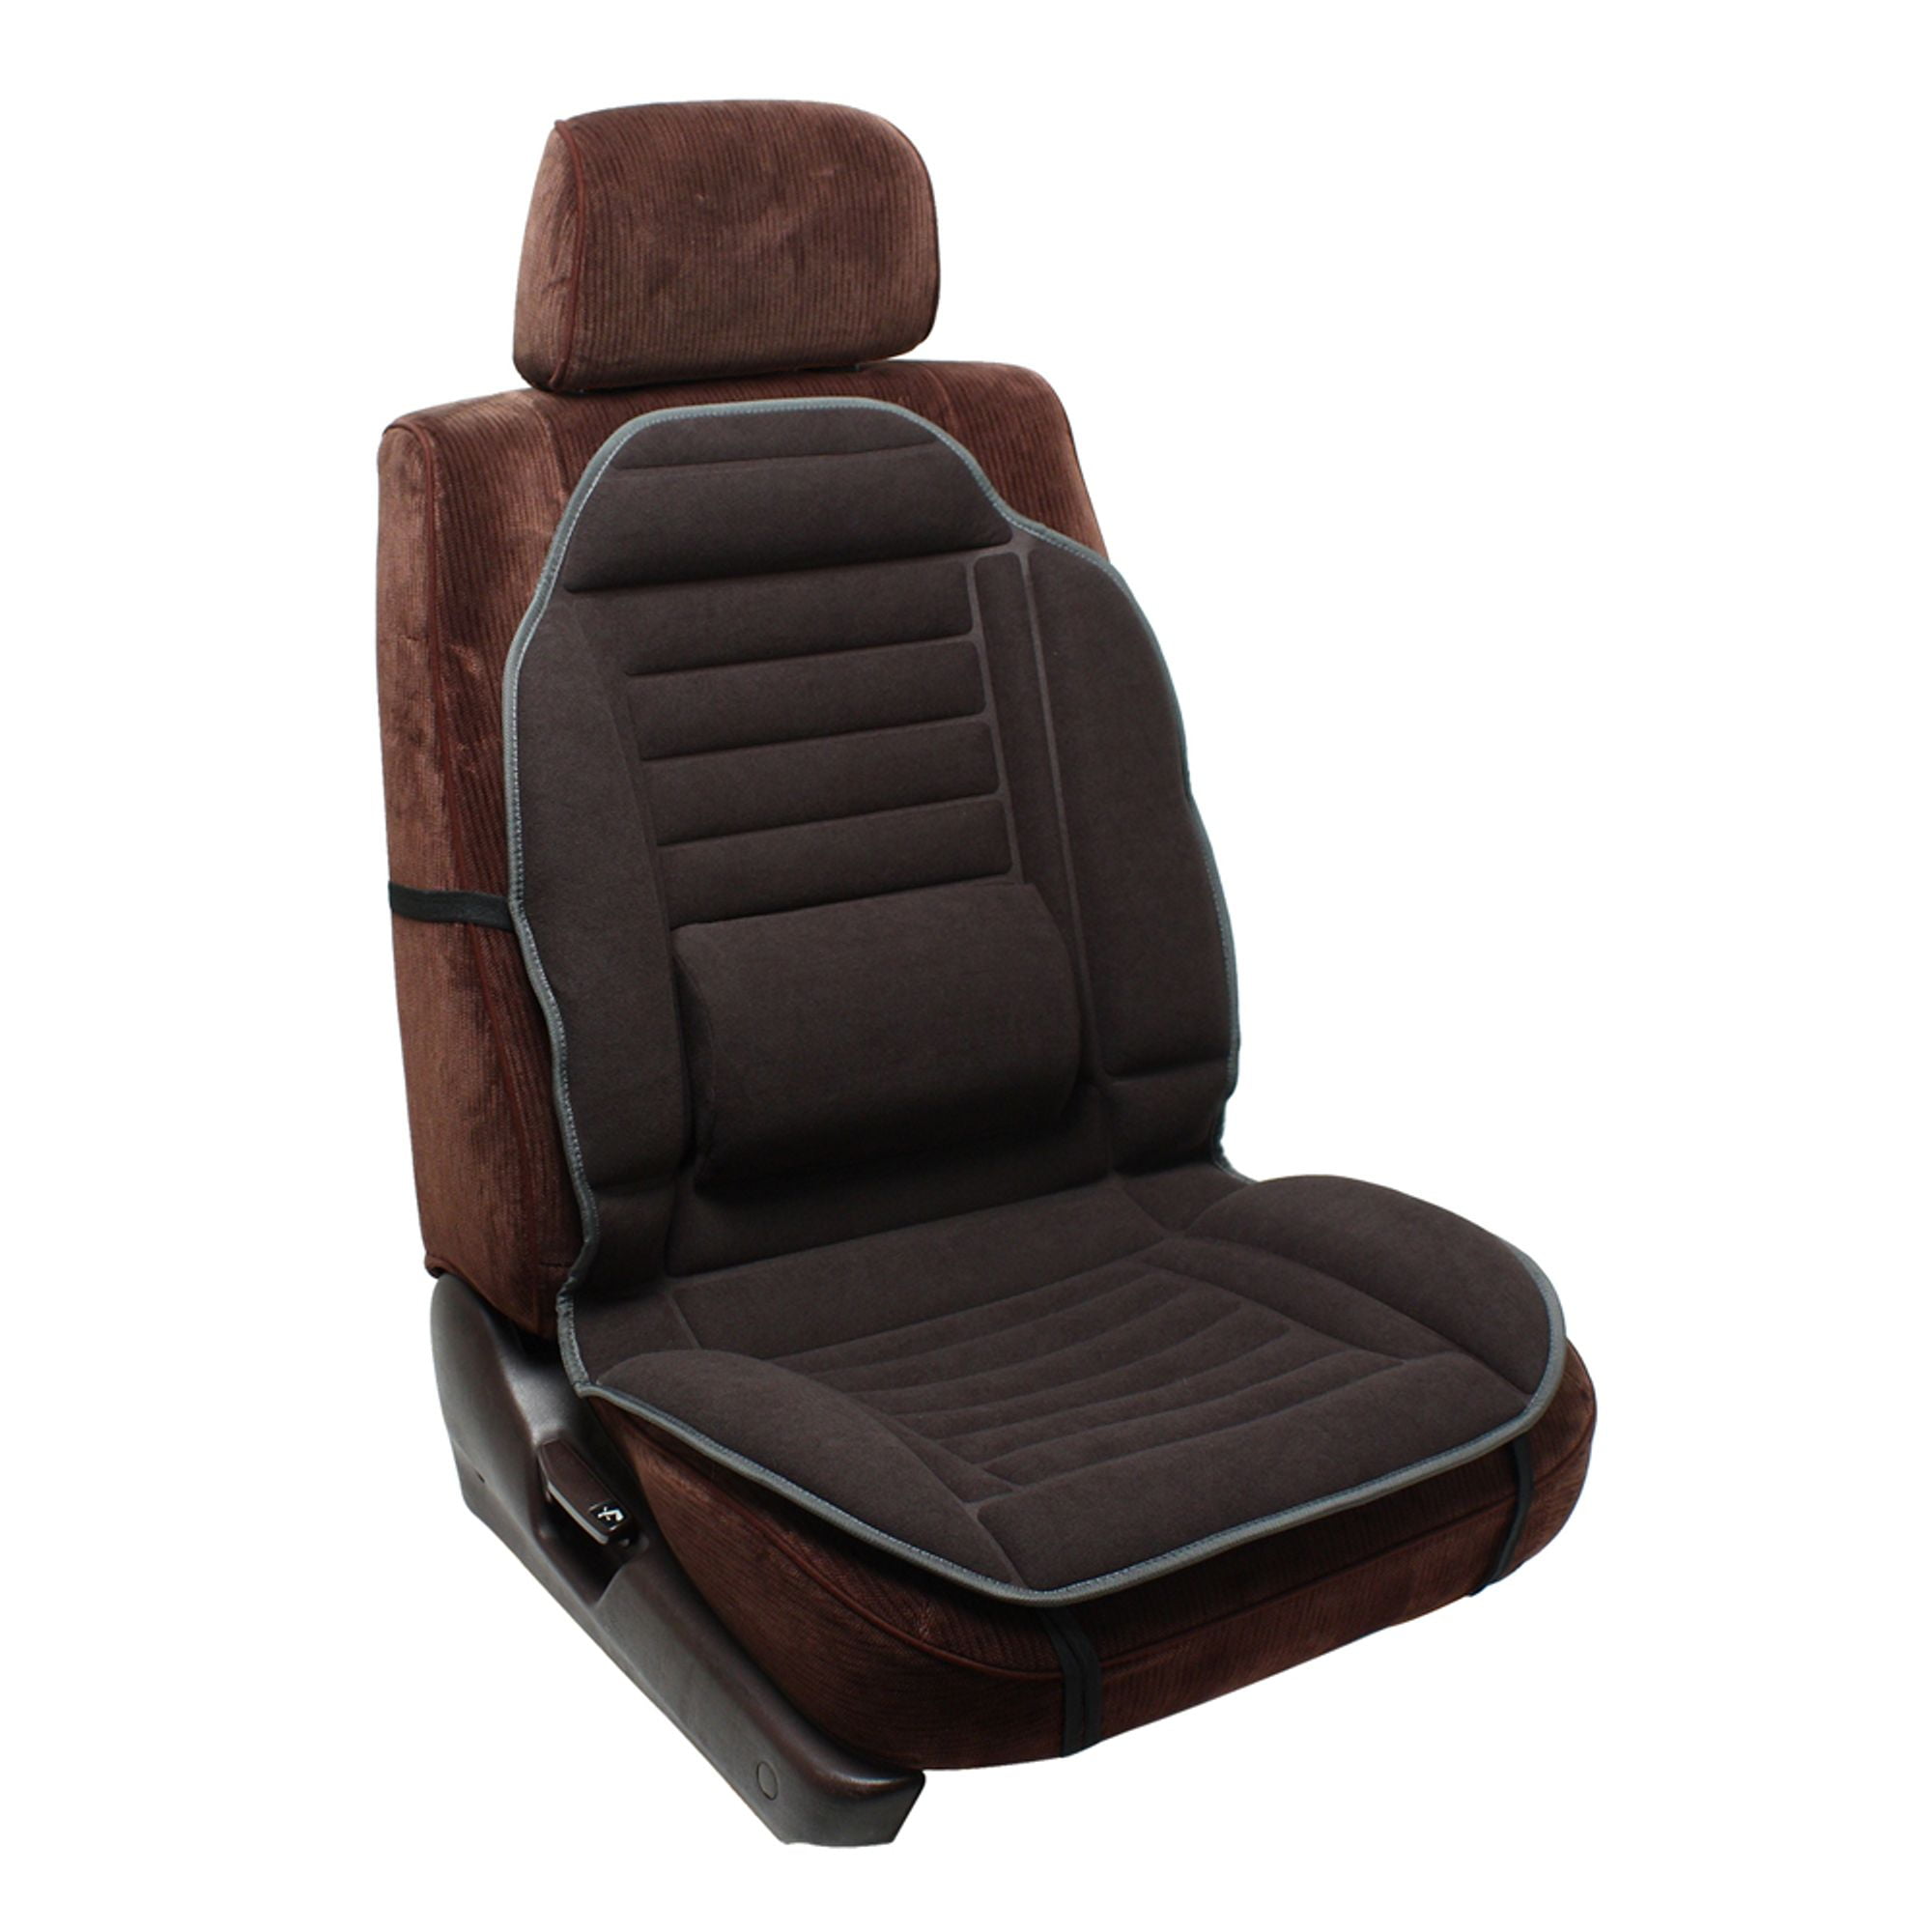 Getphonery Car Seat Cushion for Shorter Drivers Booster Height Riser Adults Short Person Wedge Back Pain Lumbar Support Driving Truck Pillow, Brown